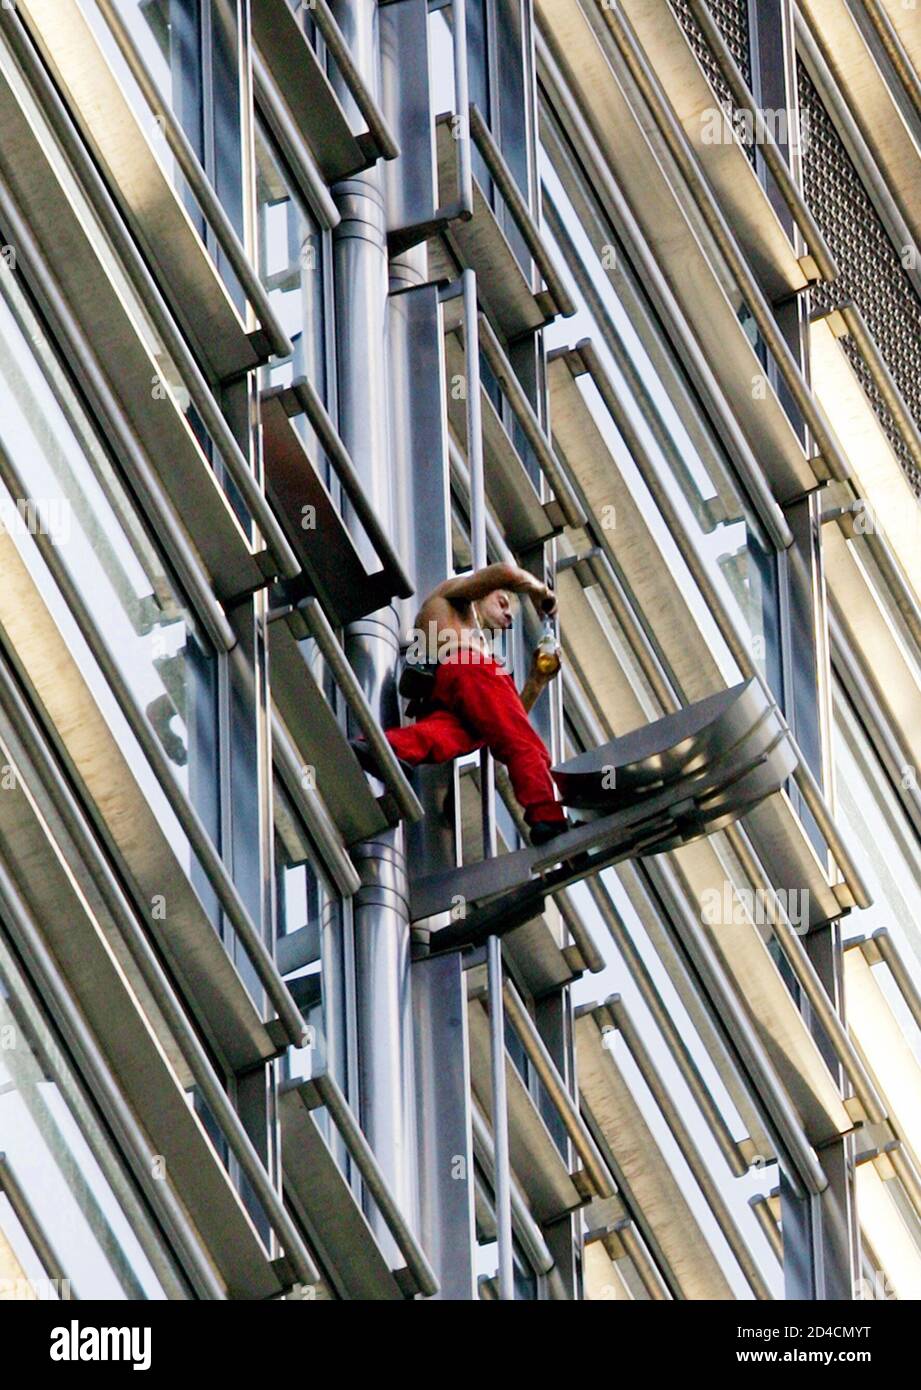 French 'Spiderman' Alain Robert has a drink while climbing up the 62 floor, 283 metre 'Cheung Kong Centre' in central Hong Kong June 11, 2005. Robert, using bare hands and feet, has climbed many world's most renowned structures including [the Empire State Building in New York, the Eiffel Tower in Paris, the Petronas Towers in Kuala Lumpur and Taipei 101 in Taiwan.] Stock Photo